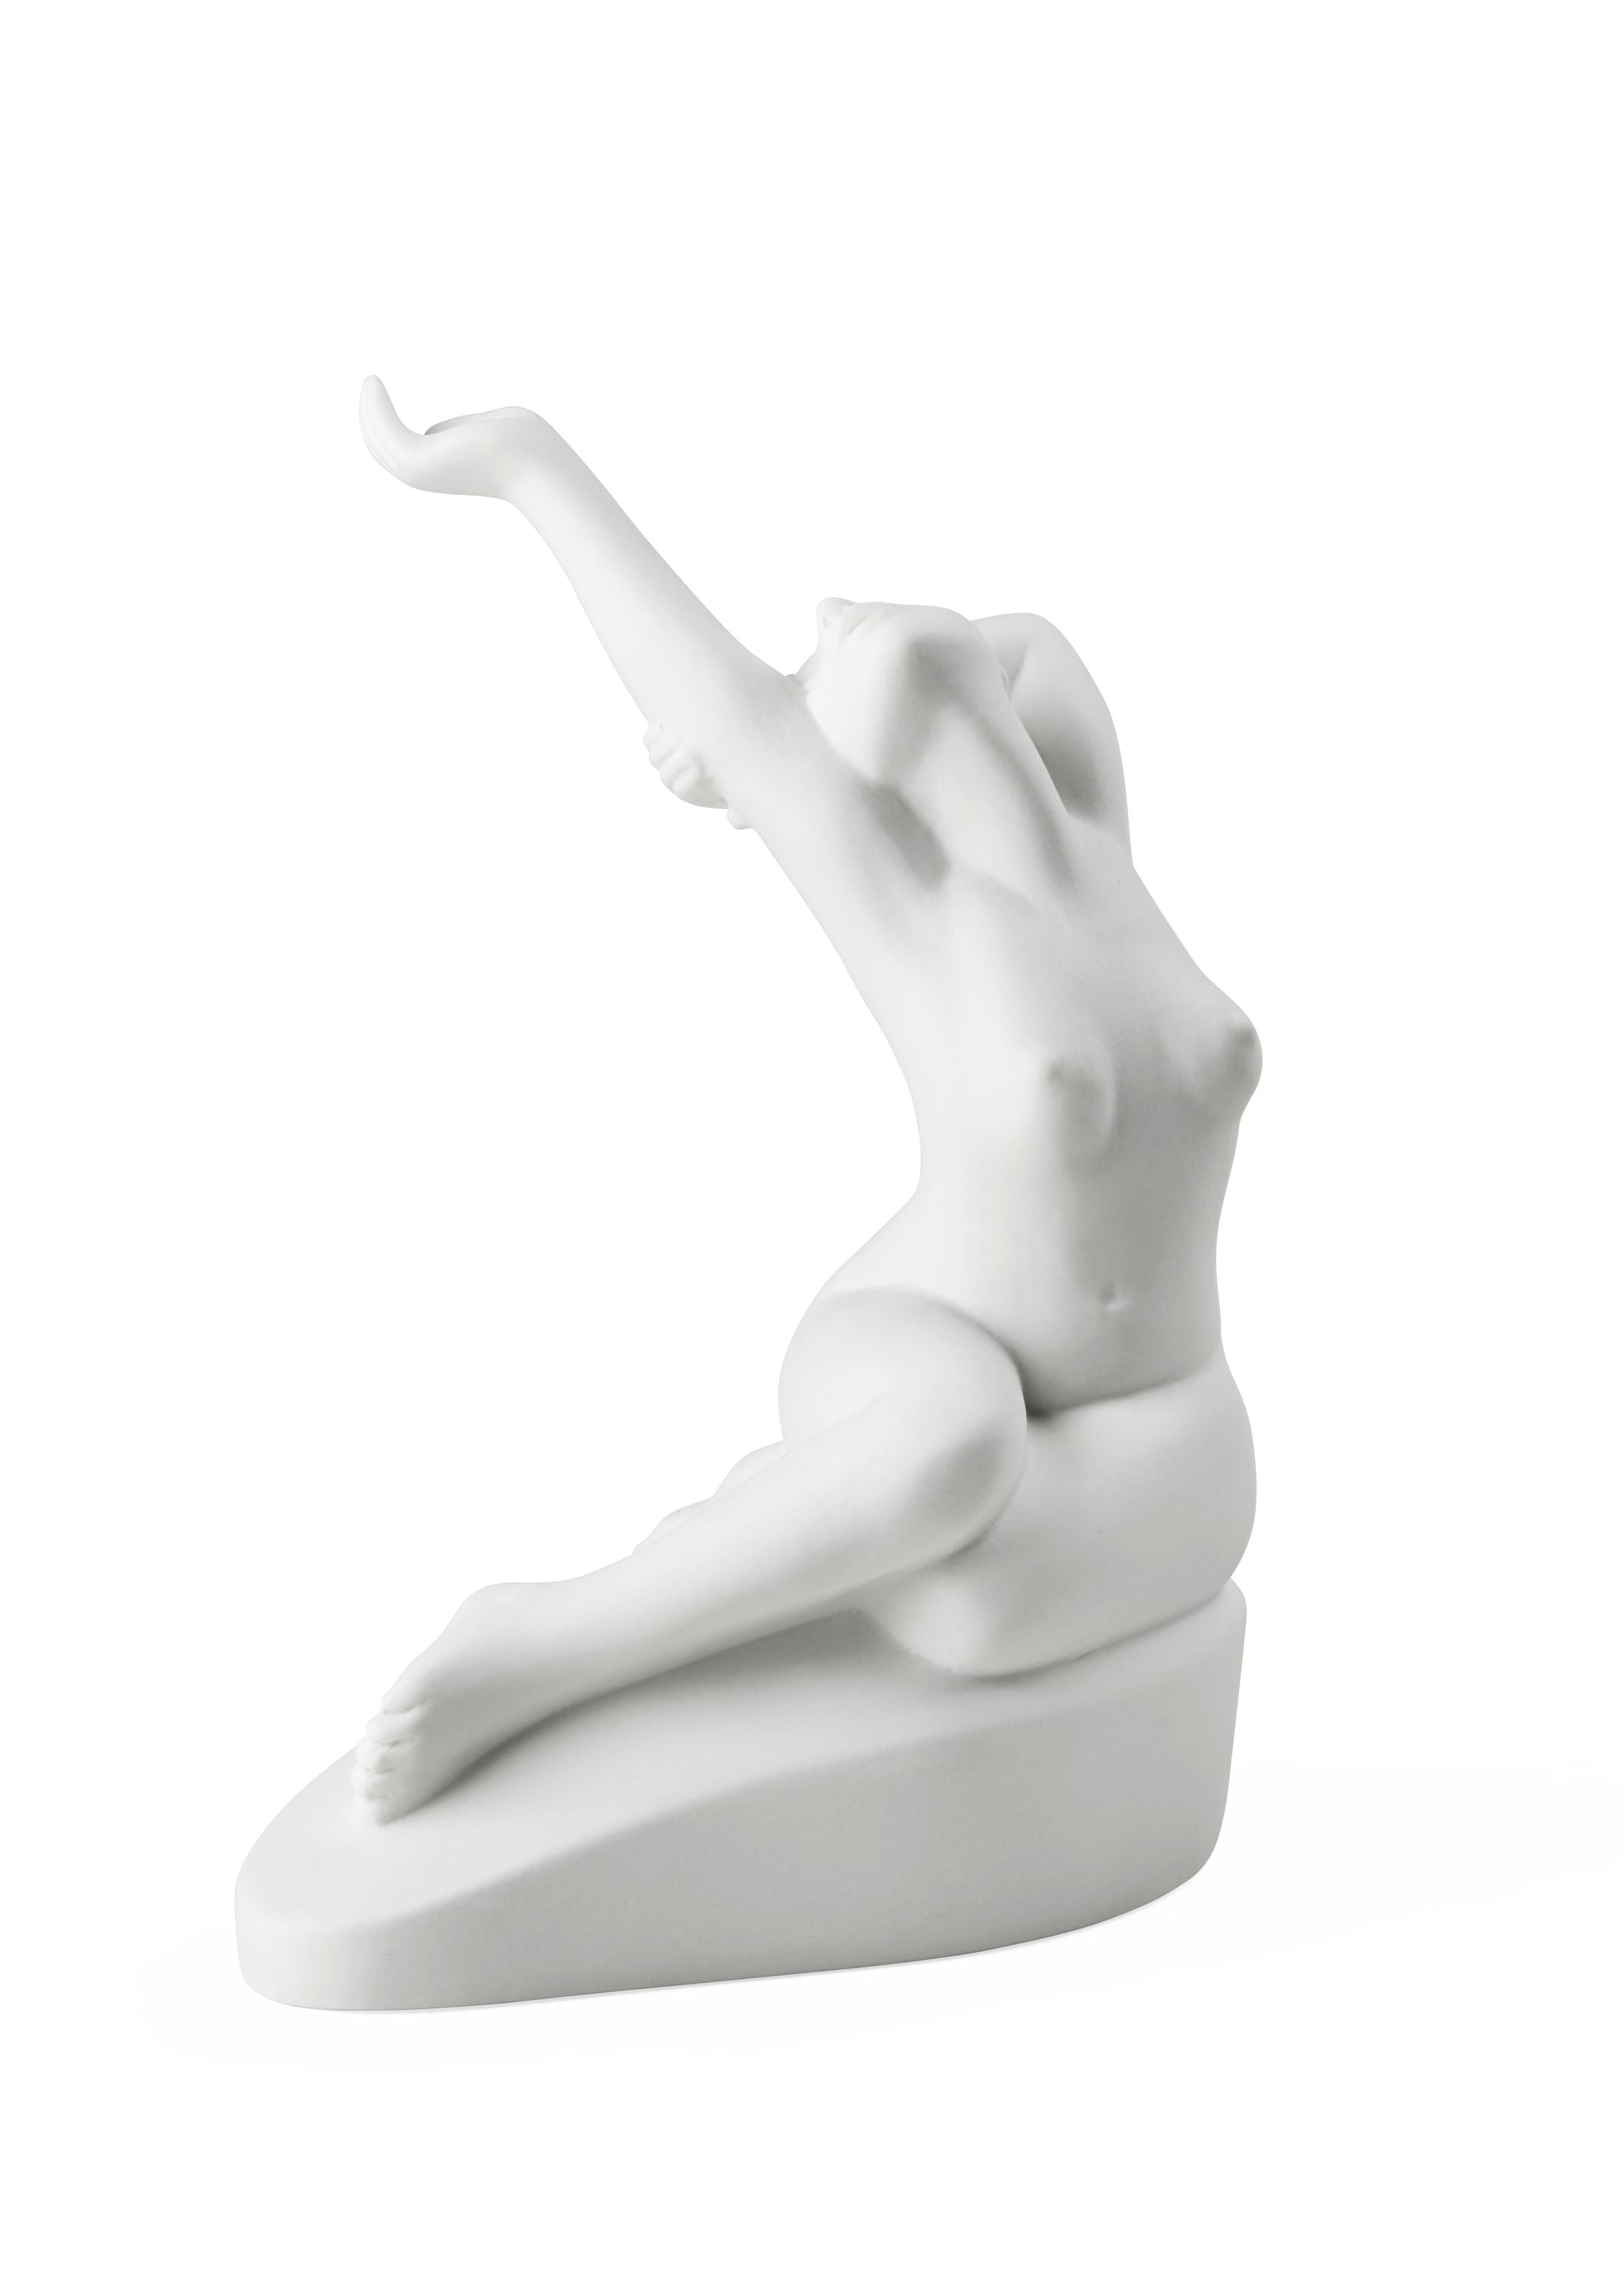 Kähler Moments Of Being Heavenly Grounded H22.5 Cm White